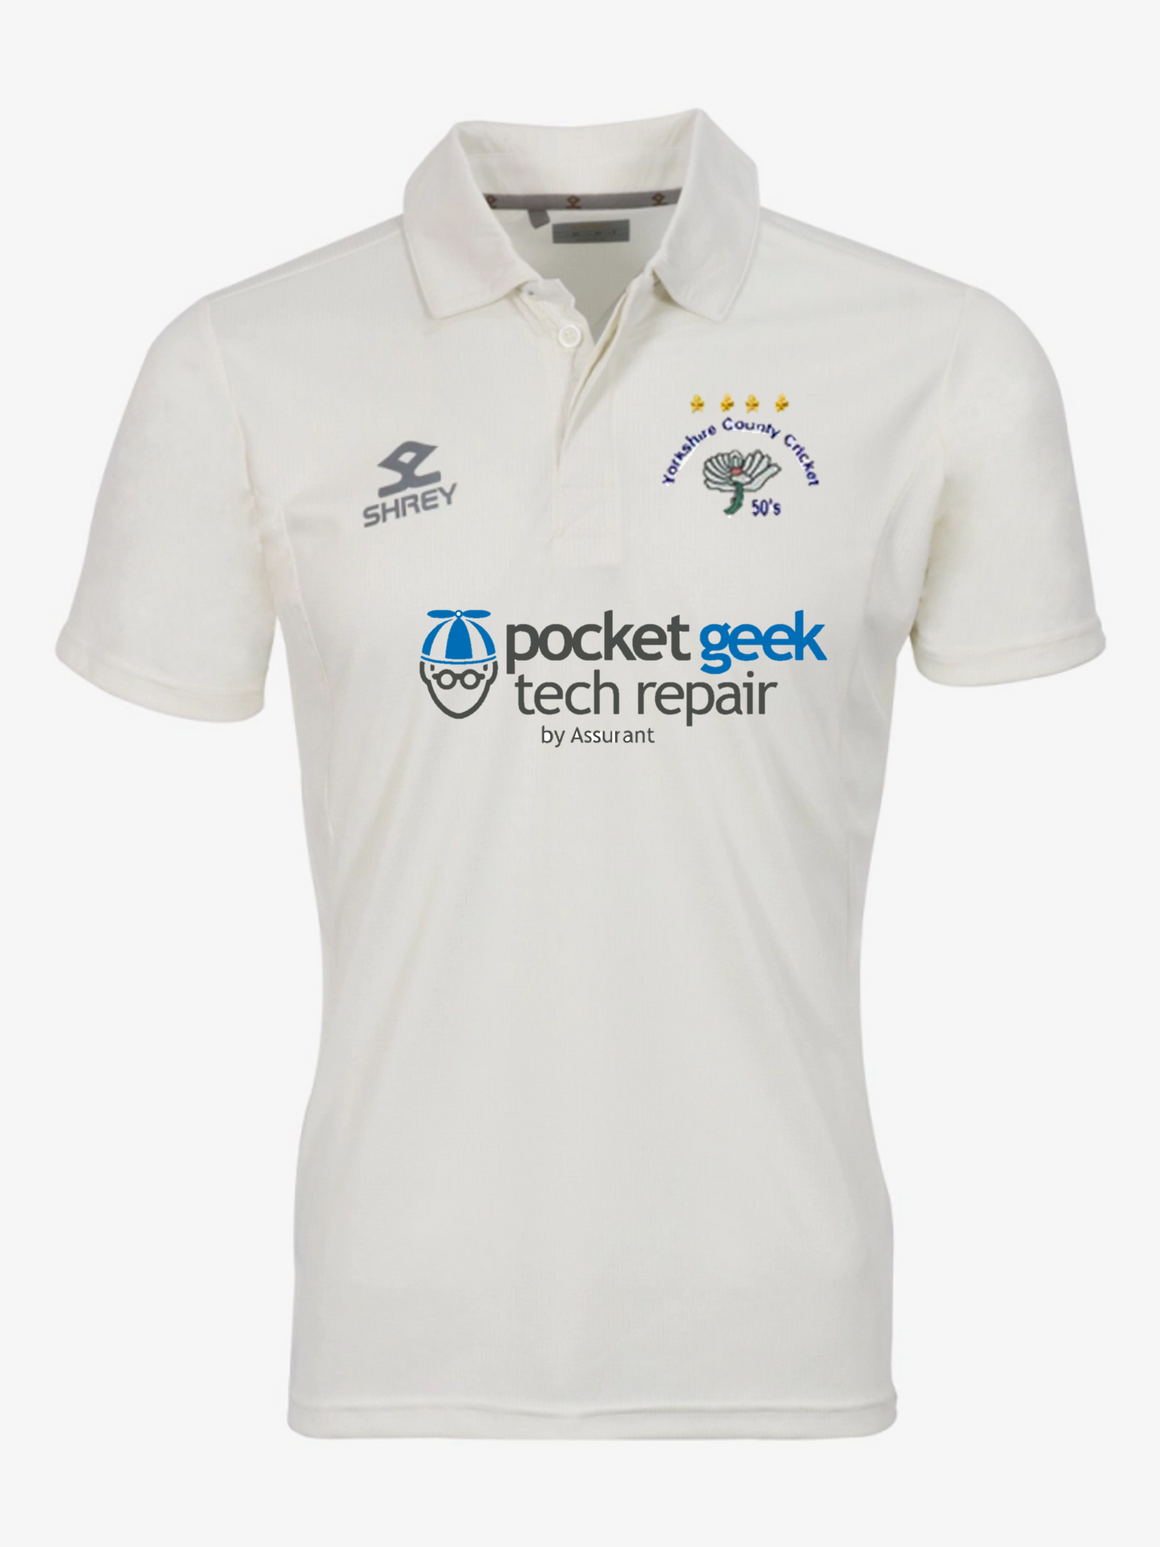 Yorkshire Over 50's S/S Performance Playing Shirt